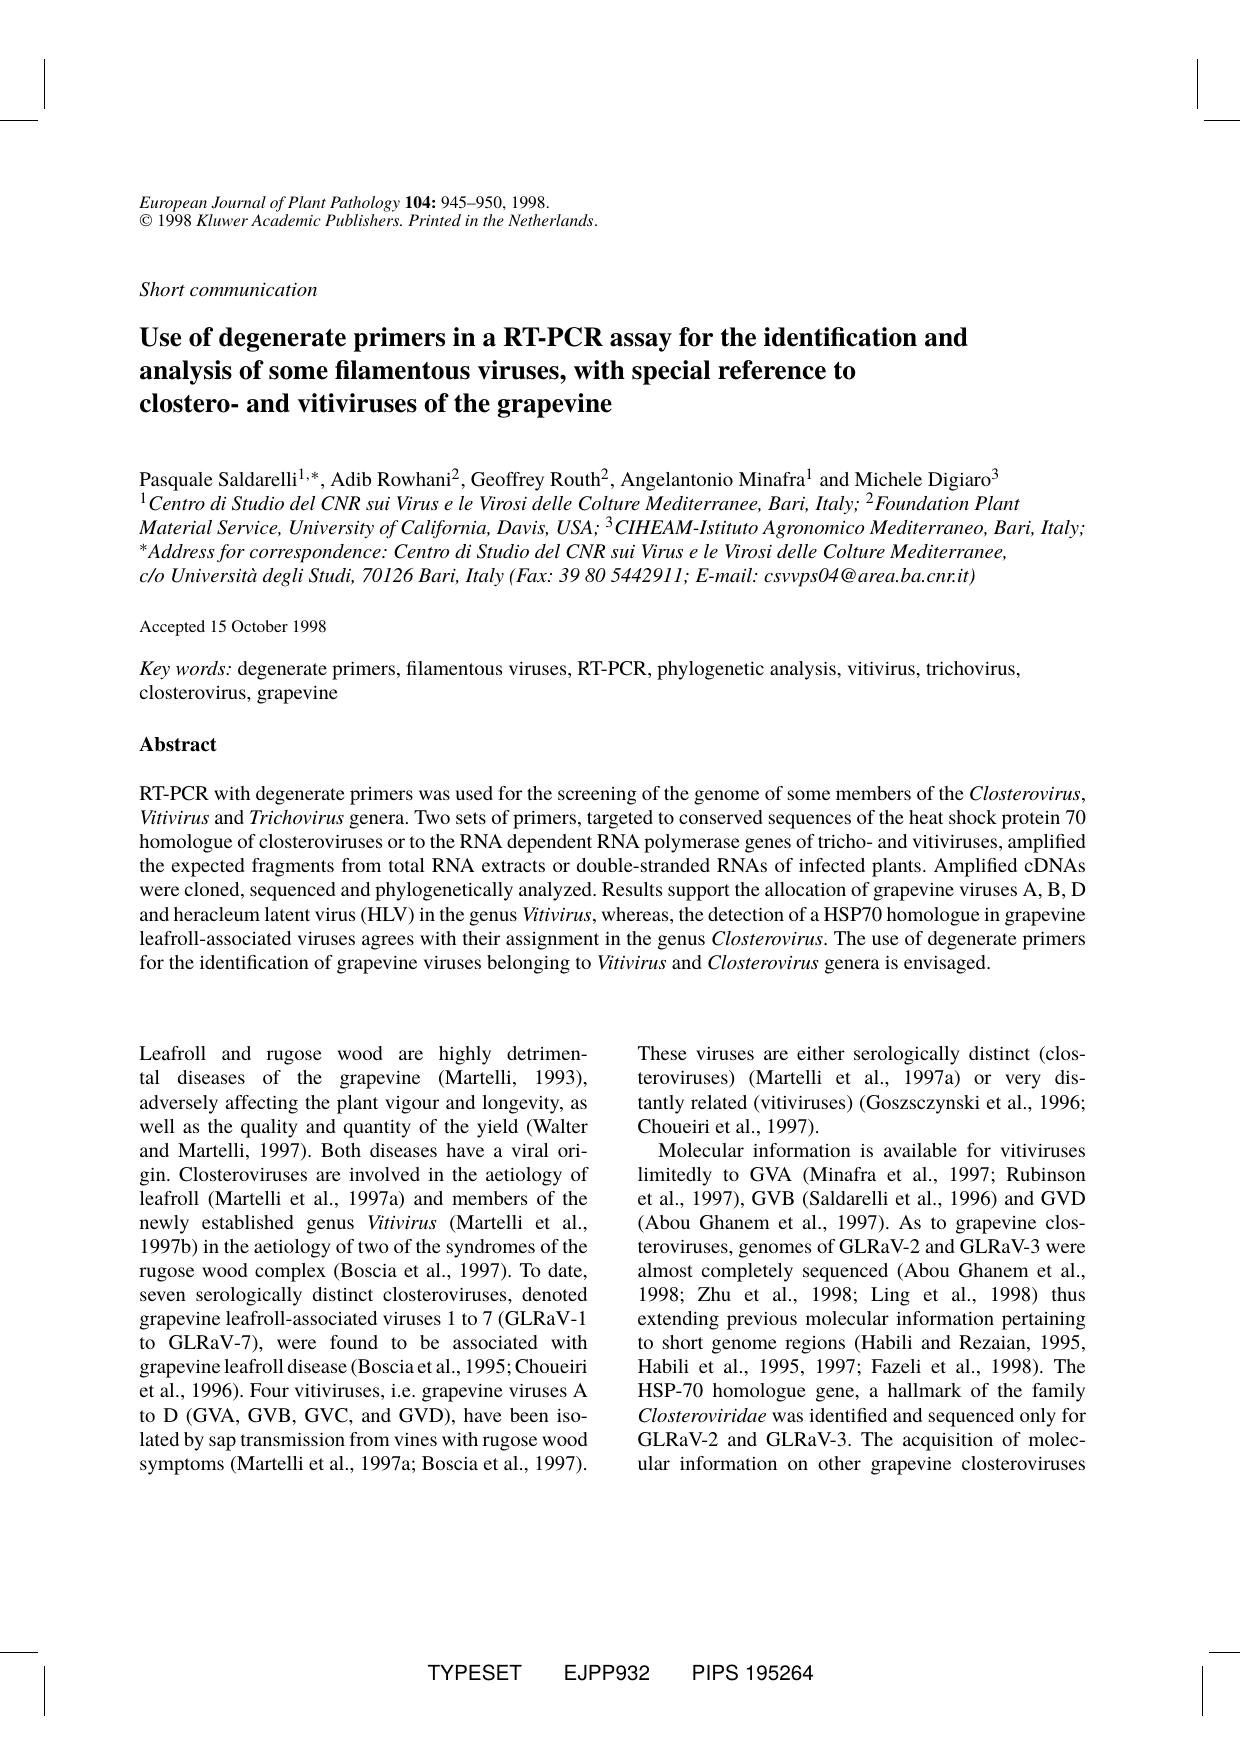 Use of Degenerate Primers in a RT-PCR Assay for the Identification and Analysis of Some Filamentous Viruses, with Special Reference to Clostero- and Vitiviruses of the Grapevine by Unknown